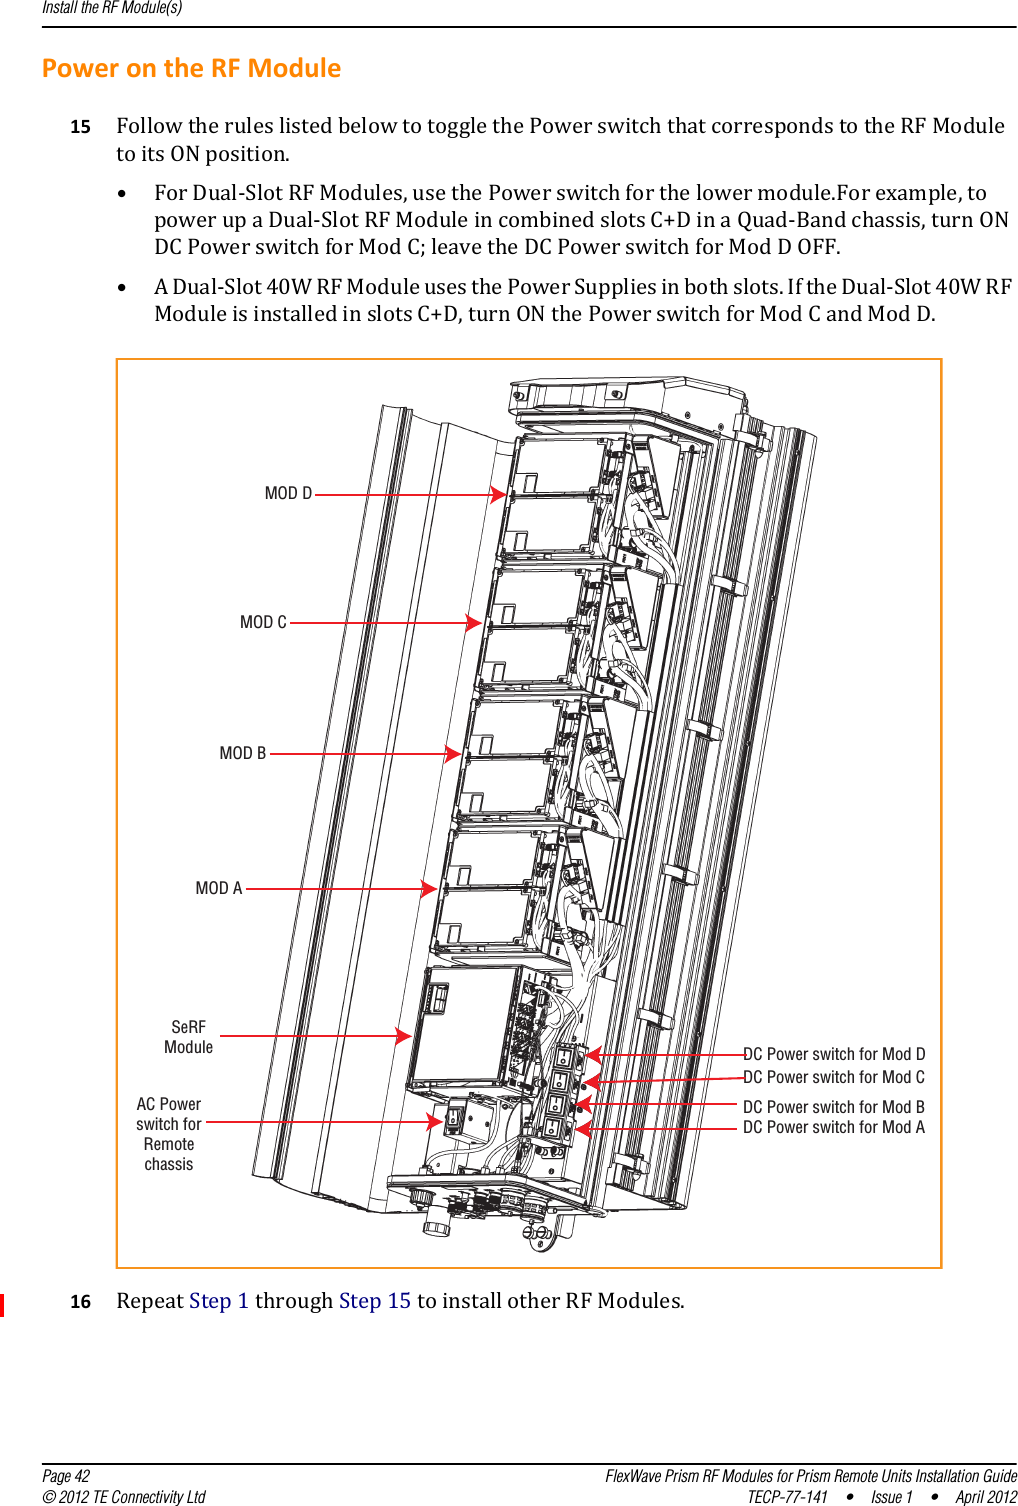 Install the RF Module(s)  Page 42 FlexWave Prism RF Modules for Prism Remote Units Installation Guide© 2012 TE Connectivity Ltd TECP-77-141 • Issue 1 • April 2012PowerontheRFModule15 FollowtheruleslistedbelowtotogglethePowerswitchthatcorrespondstotheRFModuletoitsONposition.•ForDual‐SlotRFModules,usethePowerswitchforthelowermodule.Forexample,topowerupaDual‐SlotRFModuleincombinedslotsC+DinaQuad‐Bandchassis,turnONDCPowerswitchforModC;leavetheDCPowerswitchforModDOFF.•ADual‐Slot40WRFModuleusesthePowerSuppliesinbothslots.IftheDual‐Slot40WRFModuleisinstalledinslotsC+D,turnONthePowerswitchforModCandModD.MOD ASeRFModuleAC Powerswitch forRemotechassisDC Power switch for Mod ADC Power switch for Mod BDC Power switch for Mod CDC Power switch for Mod DMOD BMOD CMOD D16 RepeatStep1throughStep15toinstallotherRFModules.